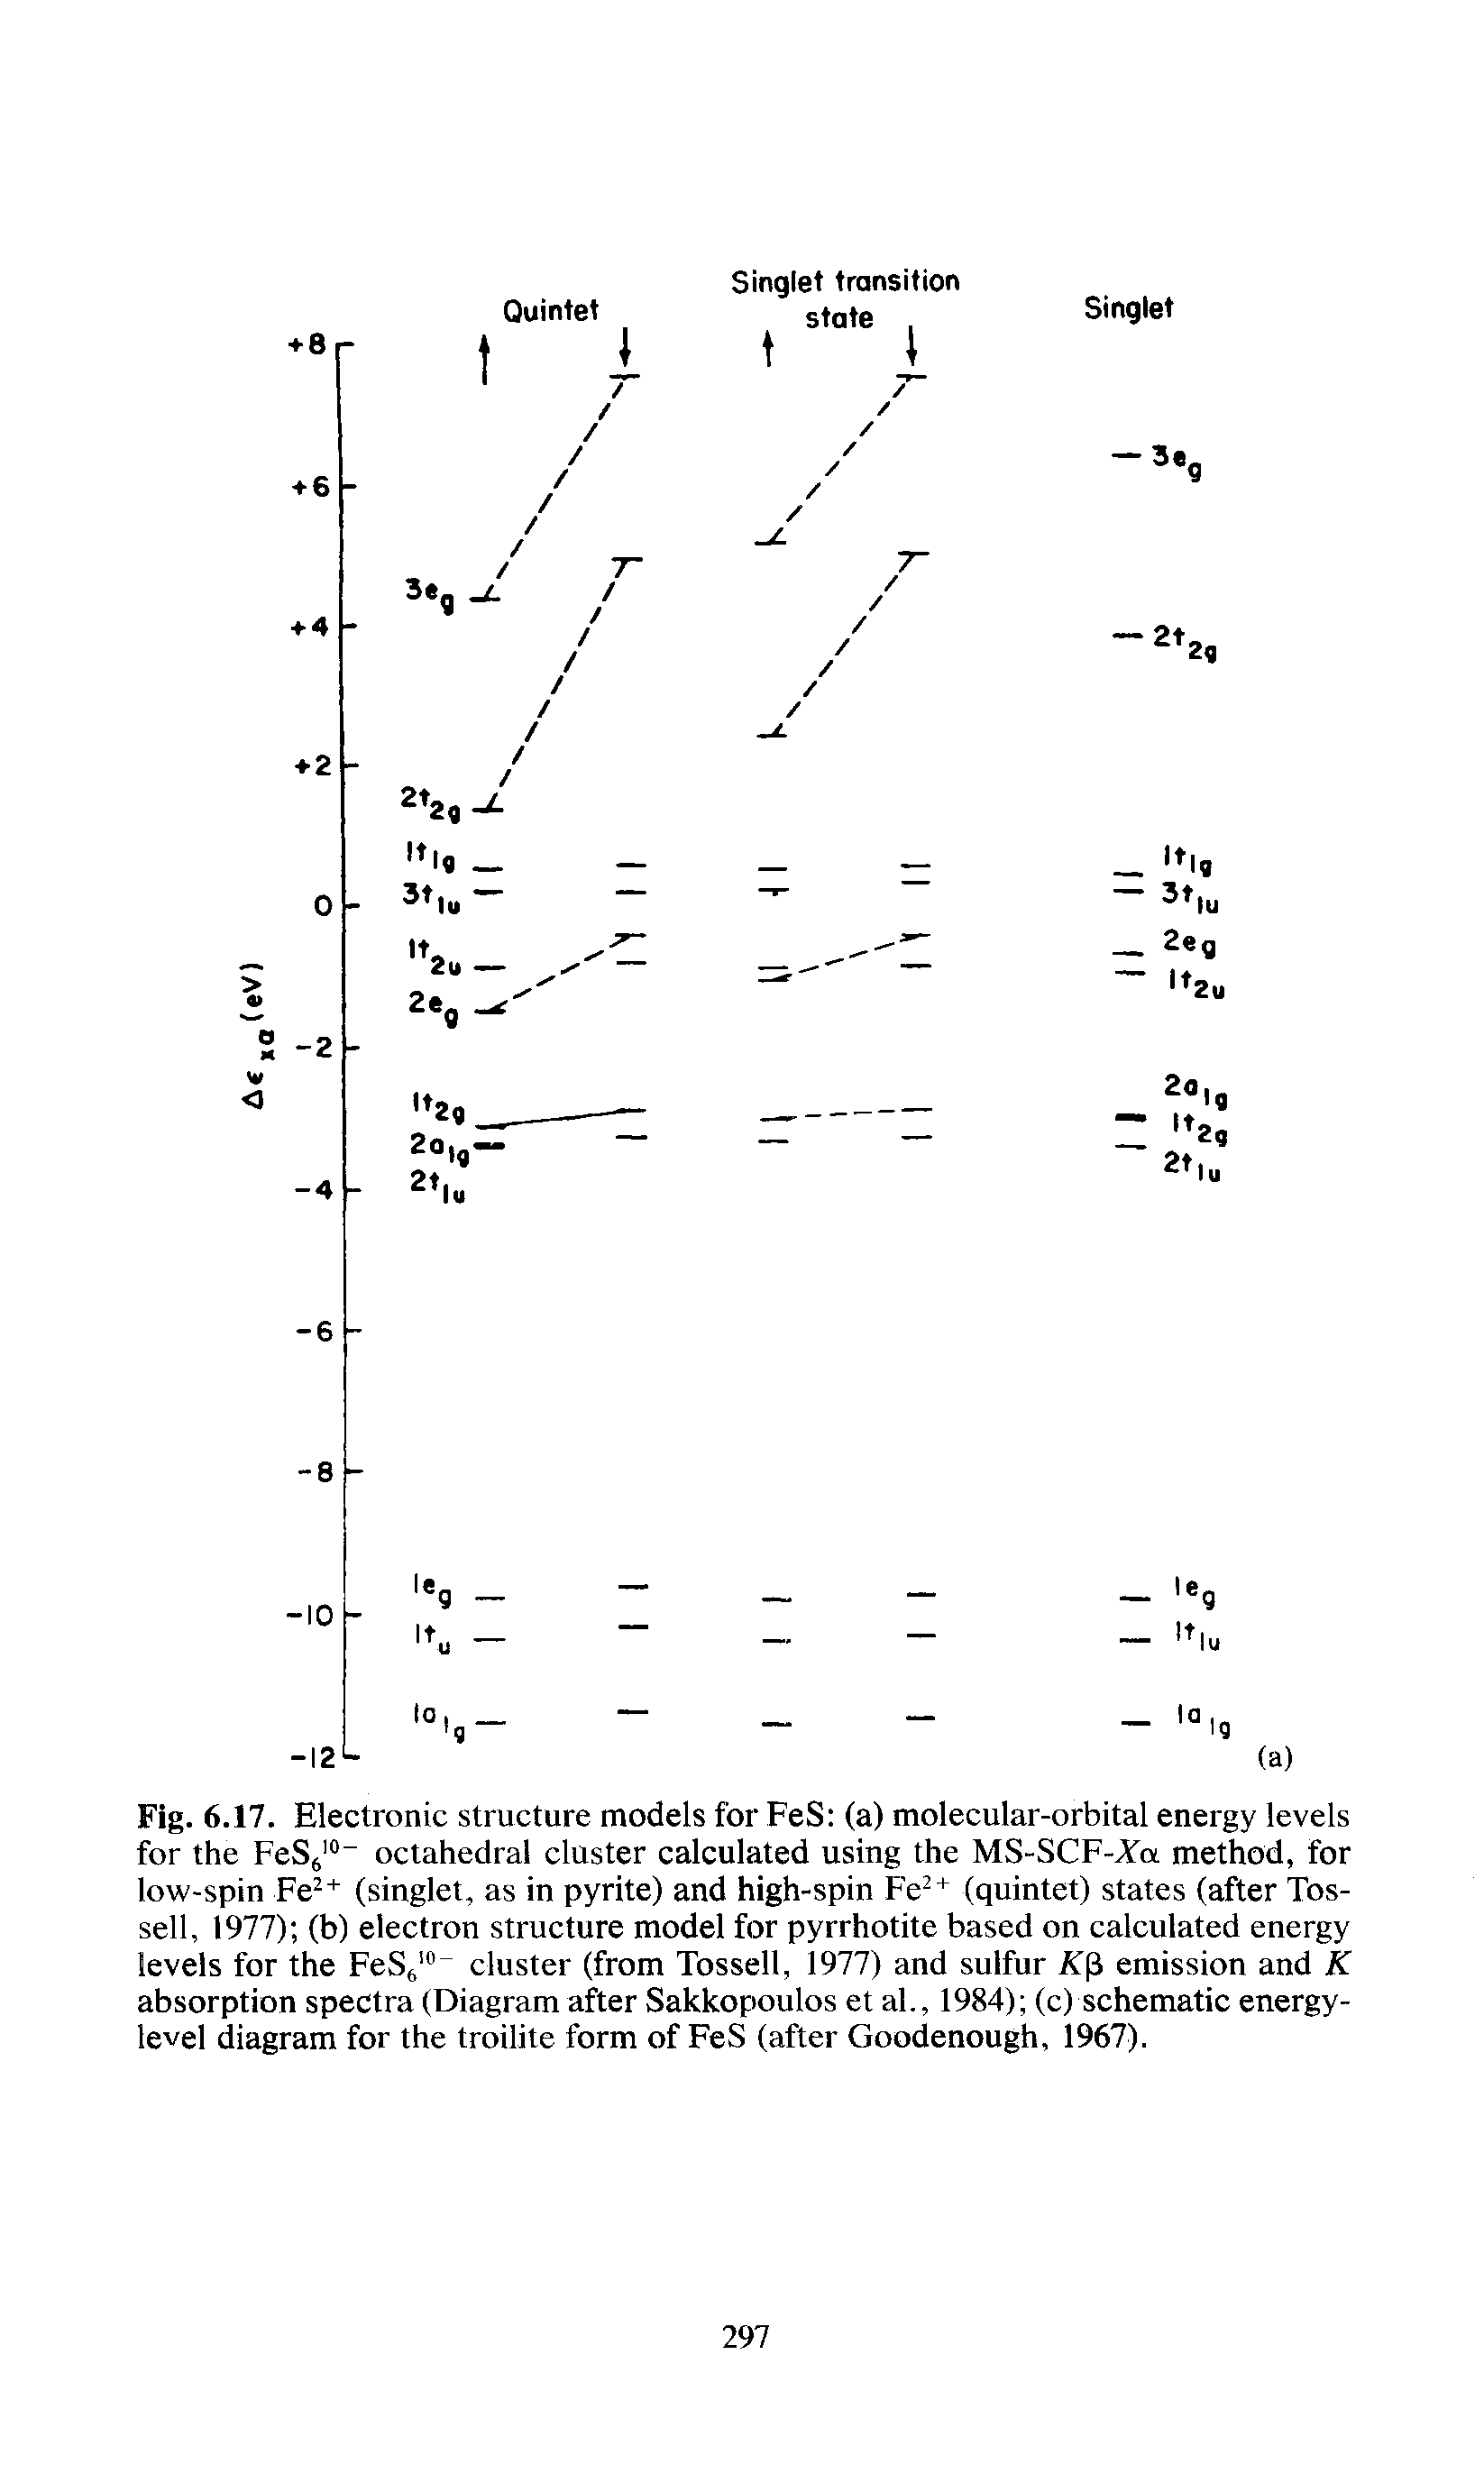 Fig. 6.17. Electronic structure models for FeS (a) molecular-orbital energy levels for the FeSj" octahedral cluster calculated using the MS-SCF-Za method, for low-spin Fe + (singlet, as in pyrite) and high-spin Fe + (quintet) states (after Tos-sell, 1977) (b) electron structure model for pyrrhotite based on calculated energy levels for the FeSe " cluster (from Tossell, 1977) and sulfur Ai(3 emission and K absorption spectra (Diagram after Sakkopoulos et ah, 1984) (c) schematic energy-level diagram for the troilite form of FeS (after Goodenough, 1967).